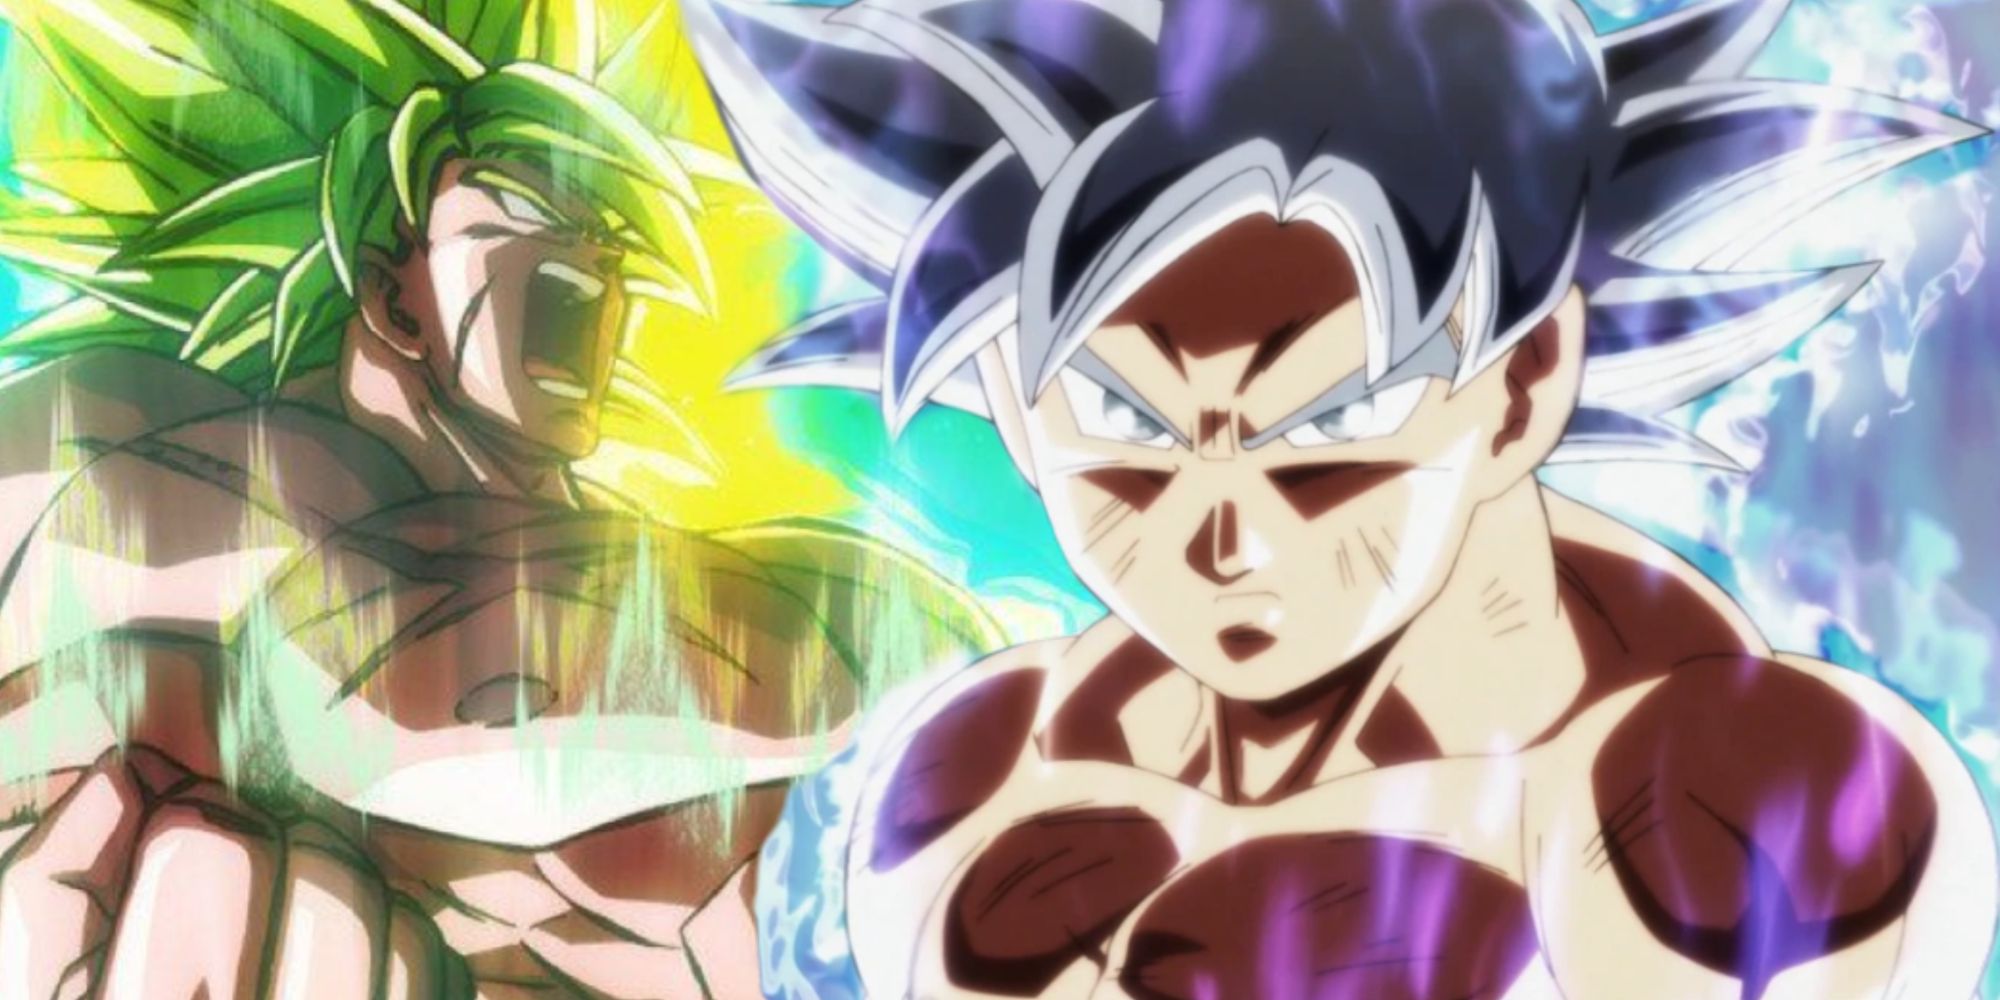 Images shows a glowing Mastered UI goku glaring towards a charging Broly from Dragon ball super in the background.